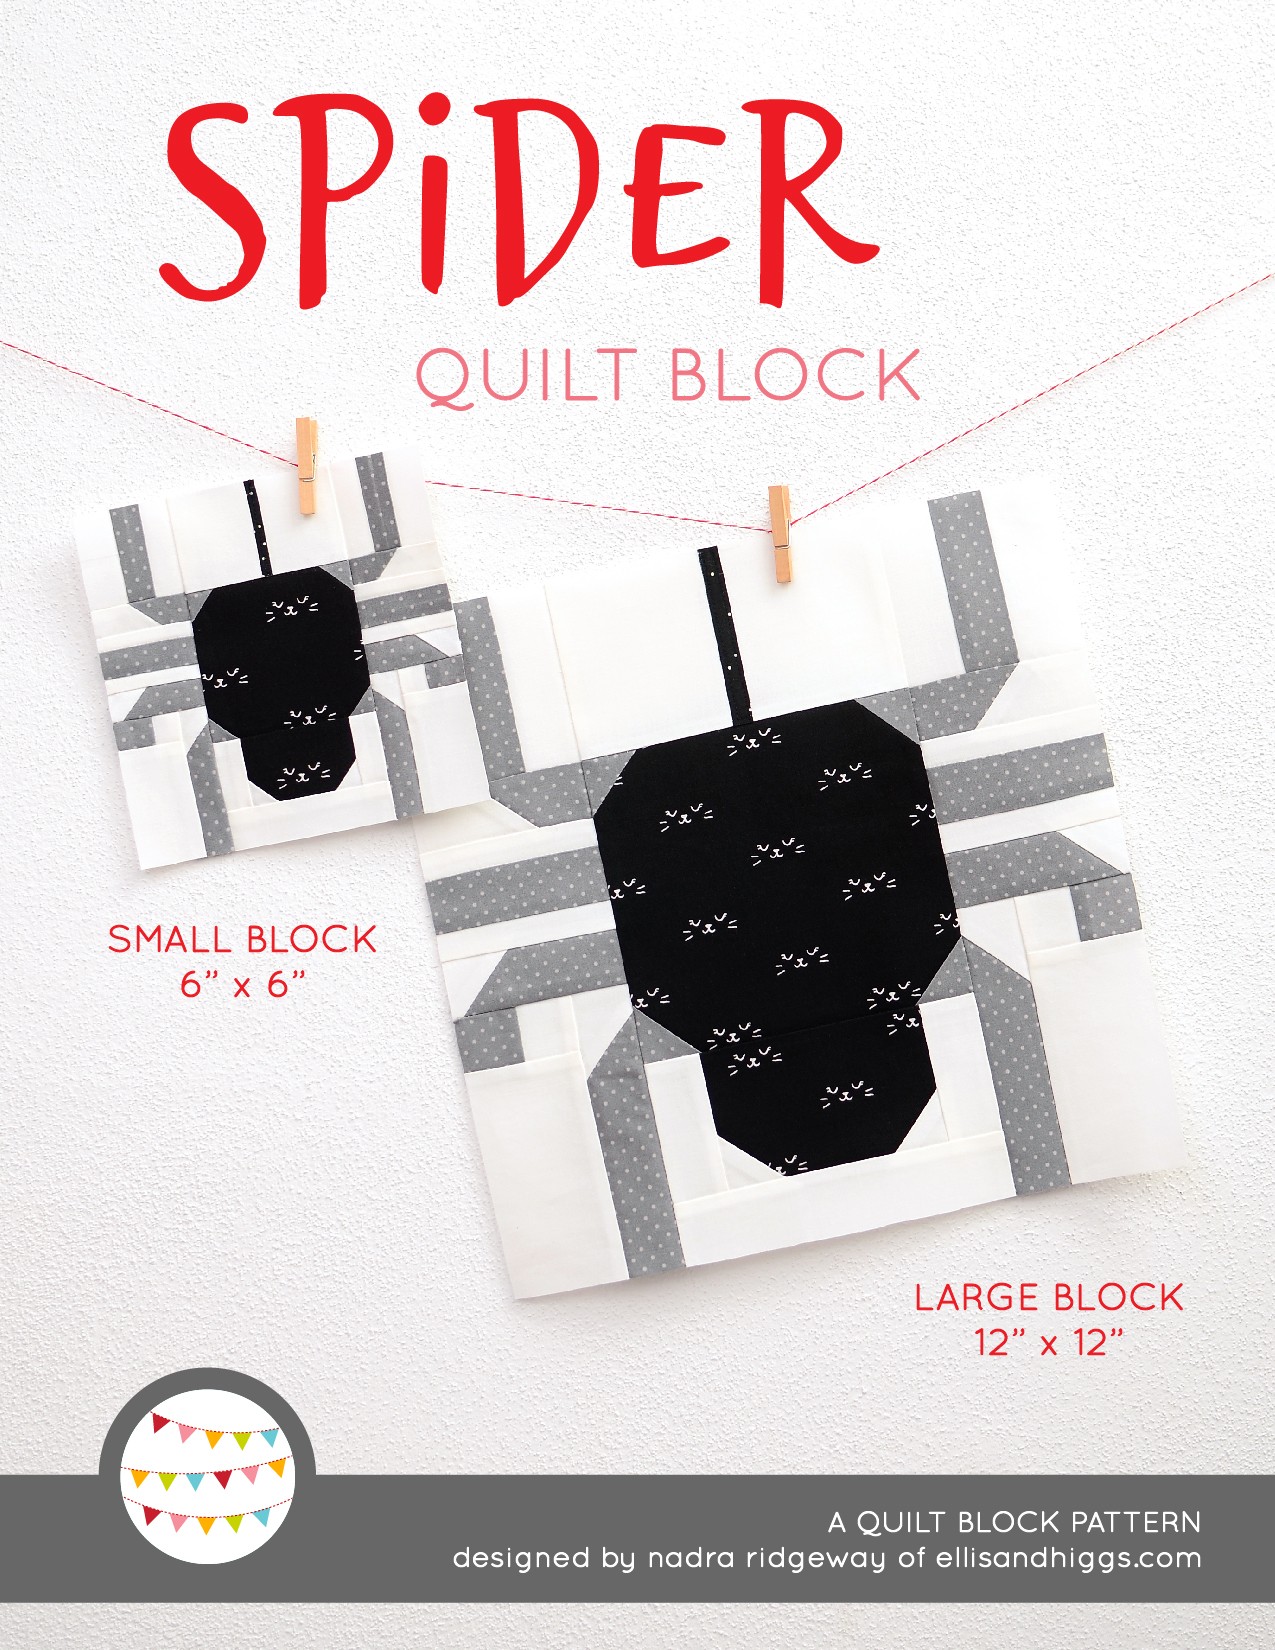 Spider quilt block in two sizes hanging on a wall